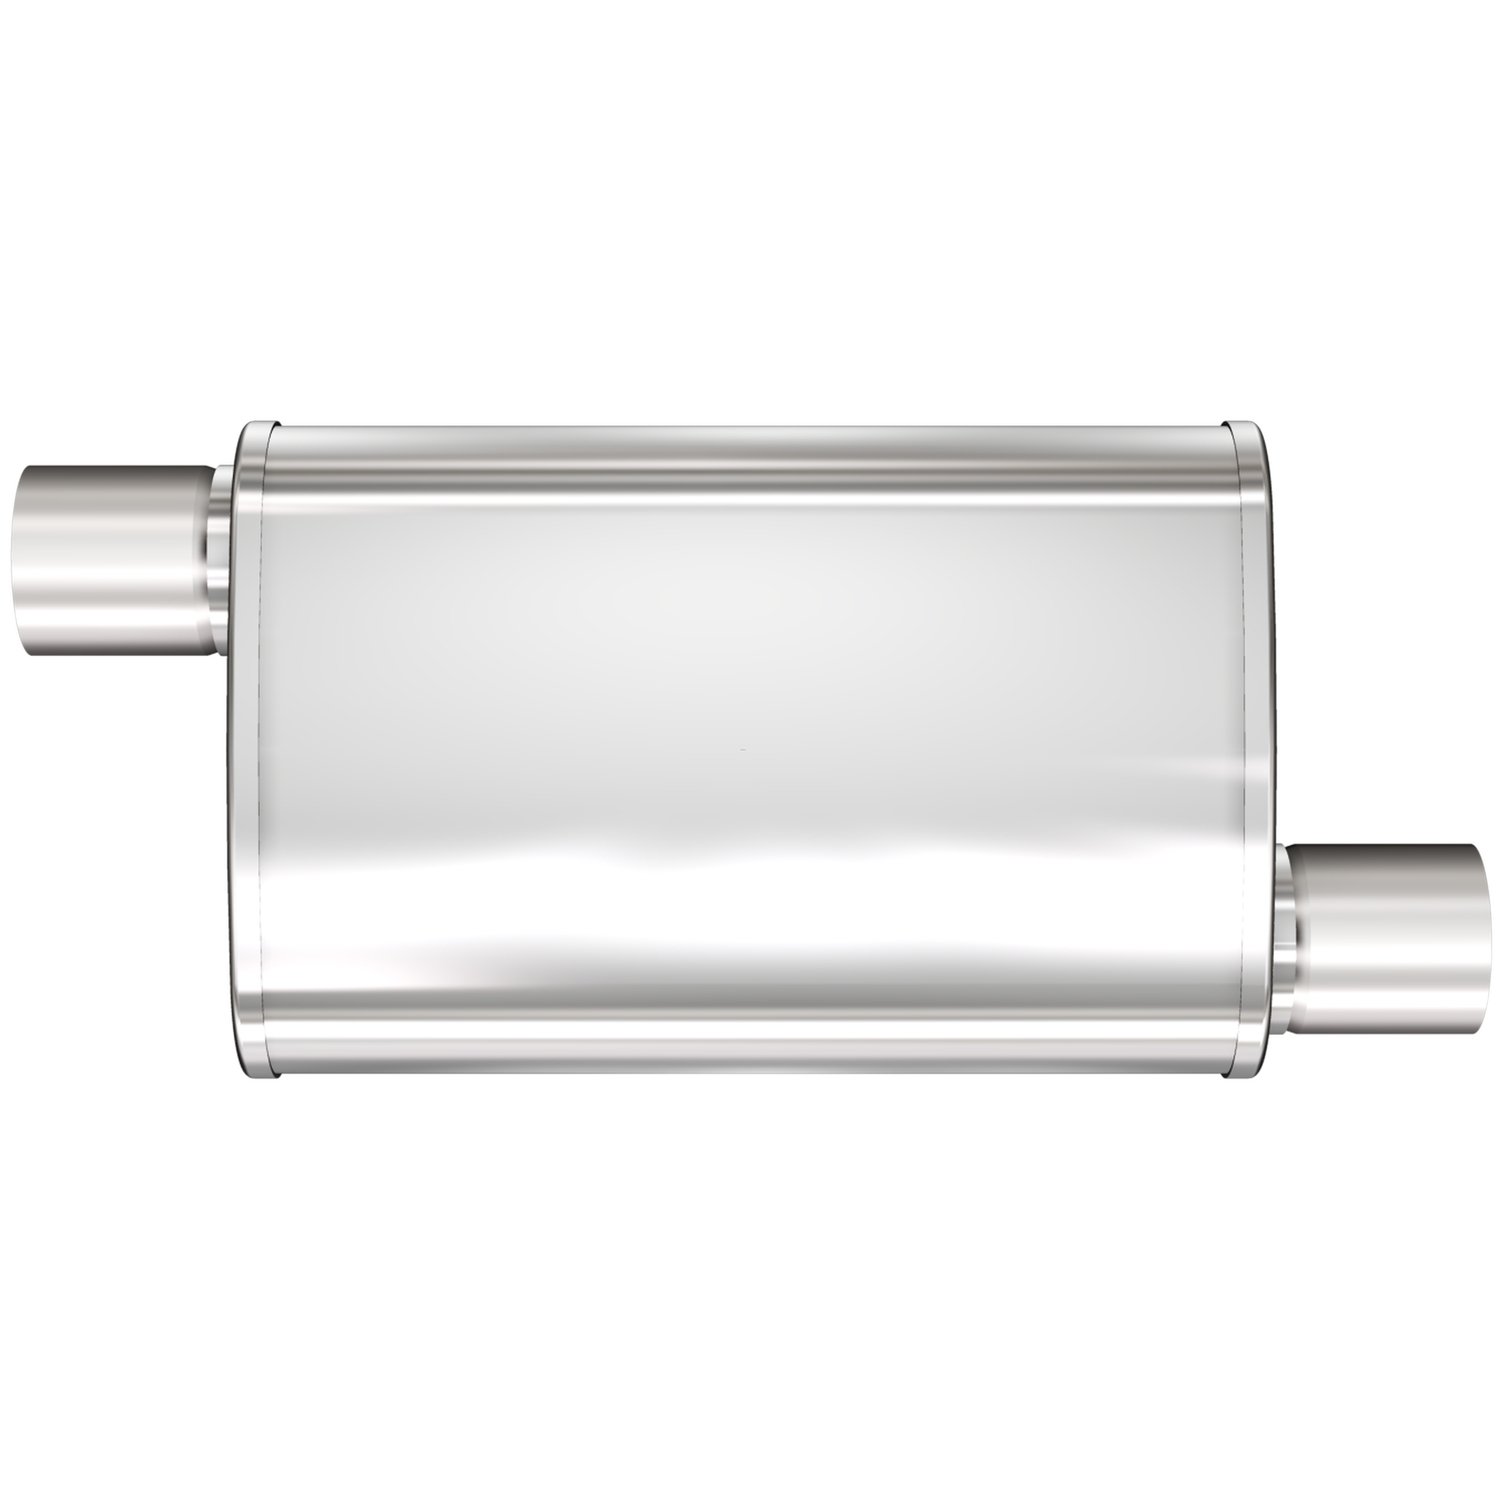 4" x 9" Oval XL 3-Chamber Muffler Offset In/Offset Out: 3"/3" Body Length: 14" Overall Length: 20" Satin Finish